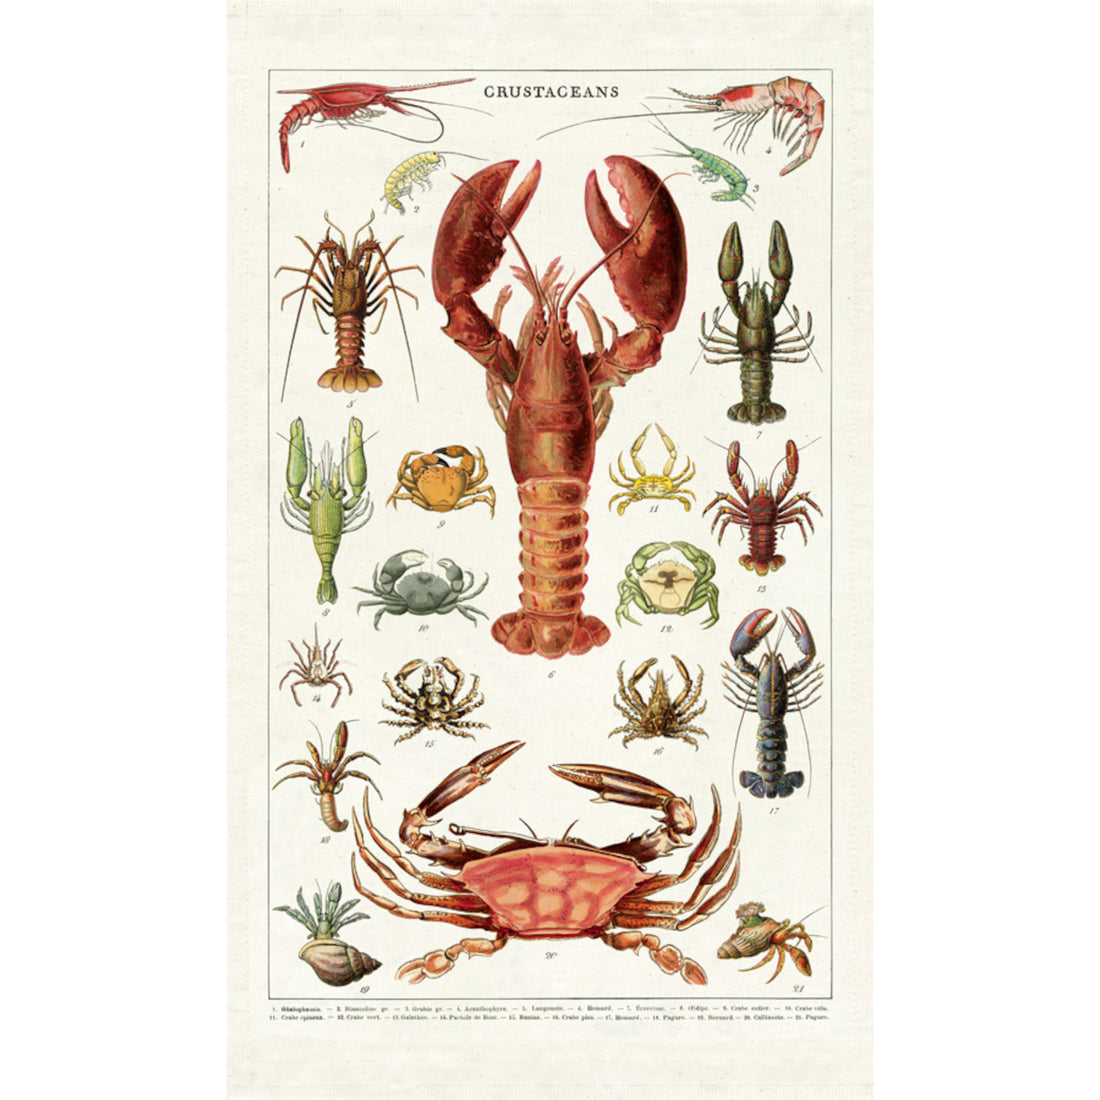 An Crustacean Cavallini Papers &amp; Co tea towel with lobsters and crabs on it, made from natural cotton.